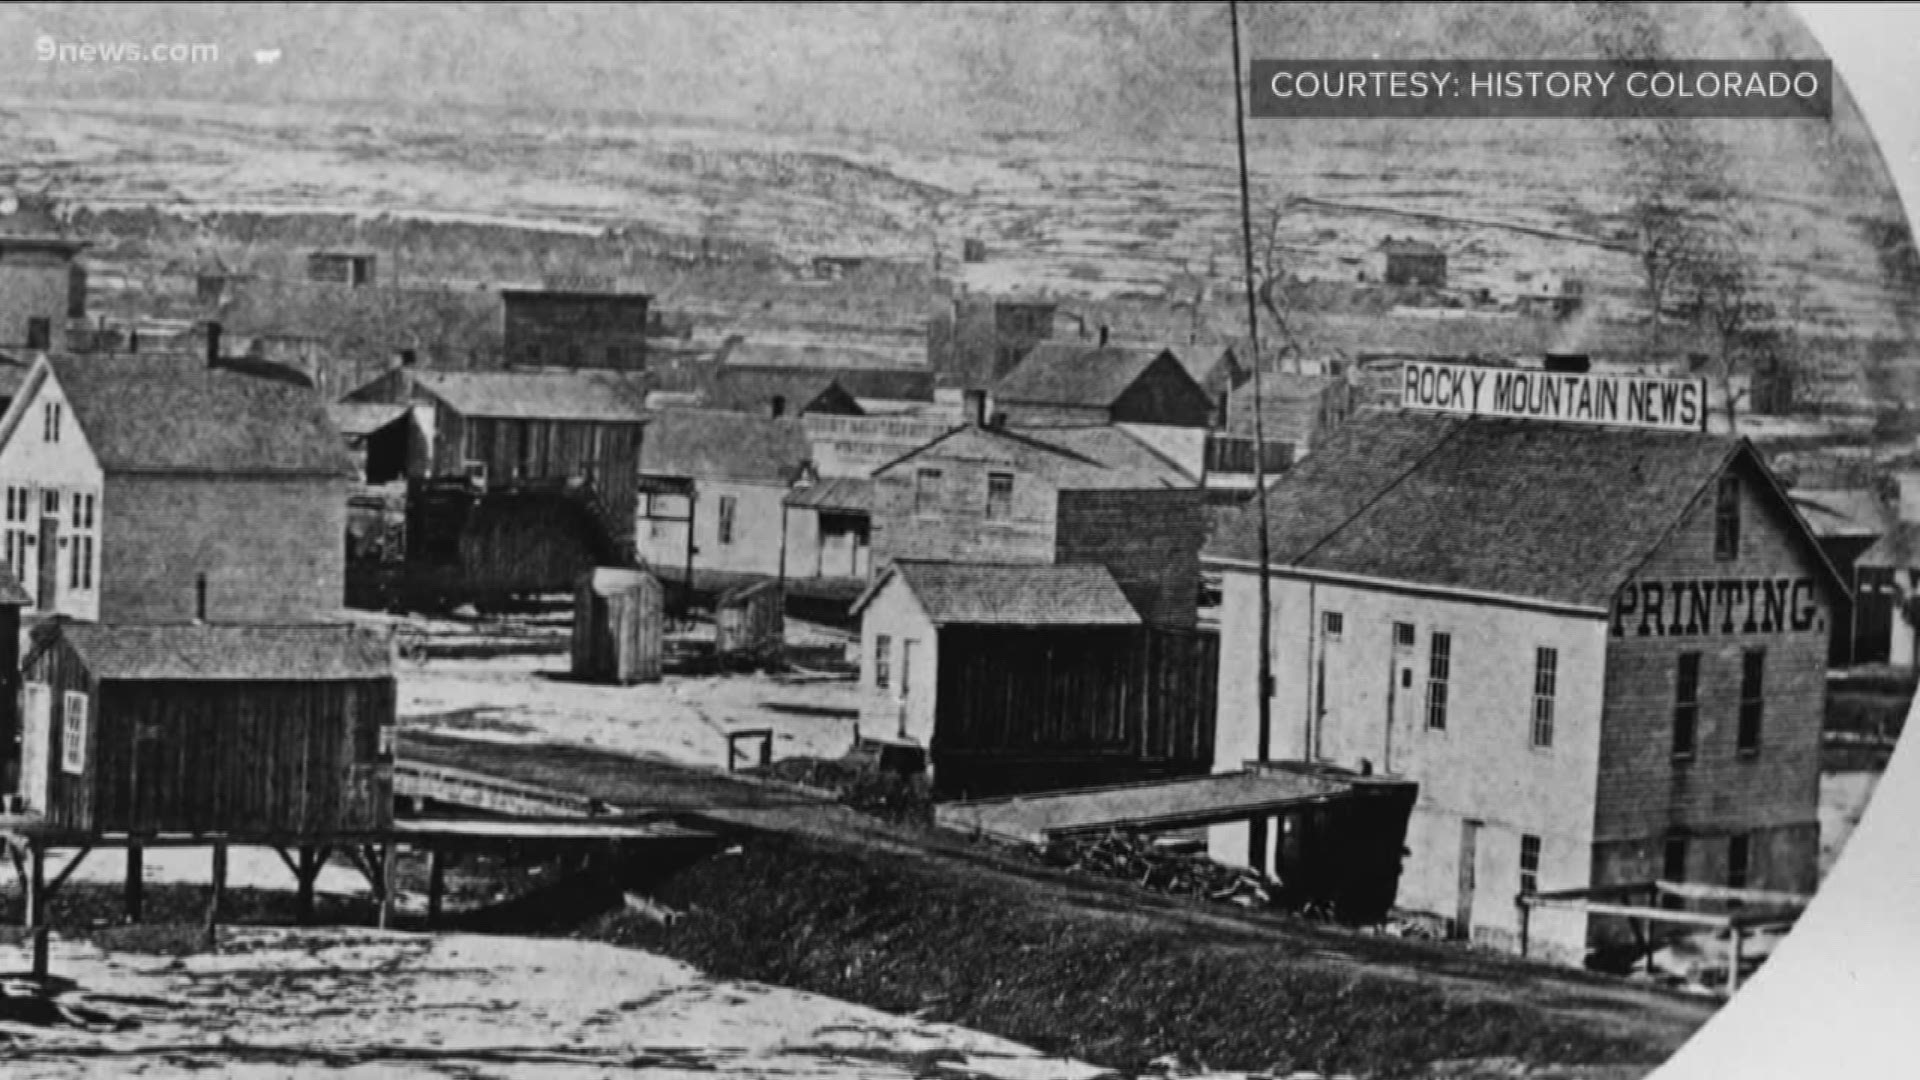 This week in Colorado History, the Denver City Town Company was formed in 1858. History Colorado helps explain why the name was chosen.